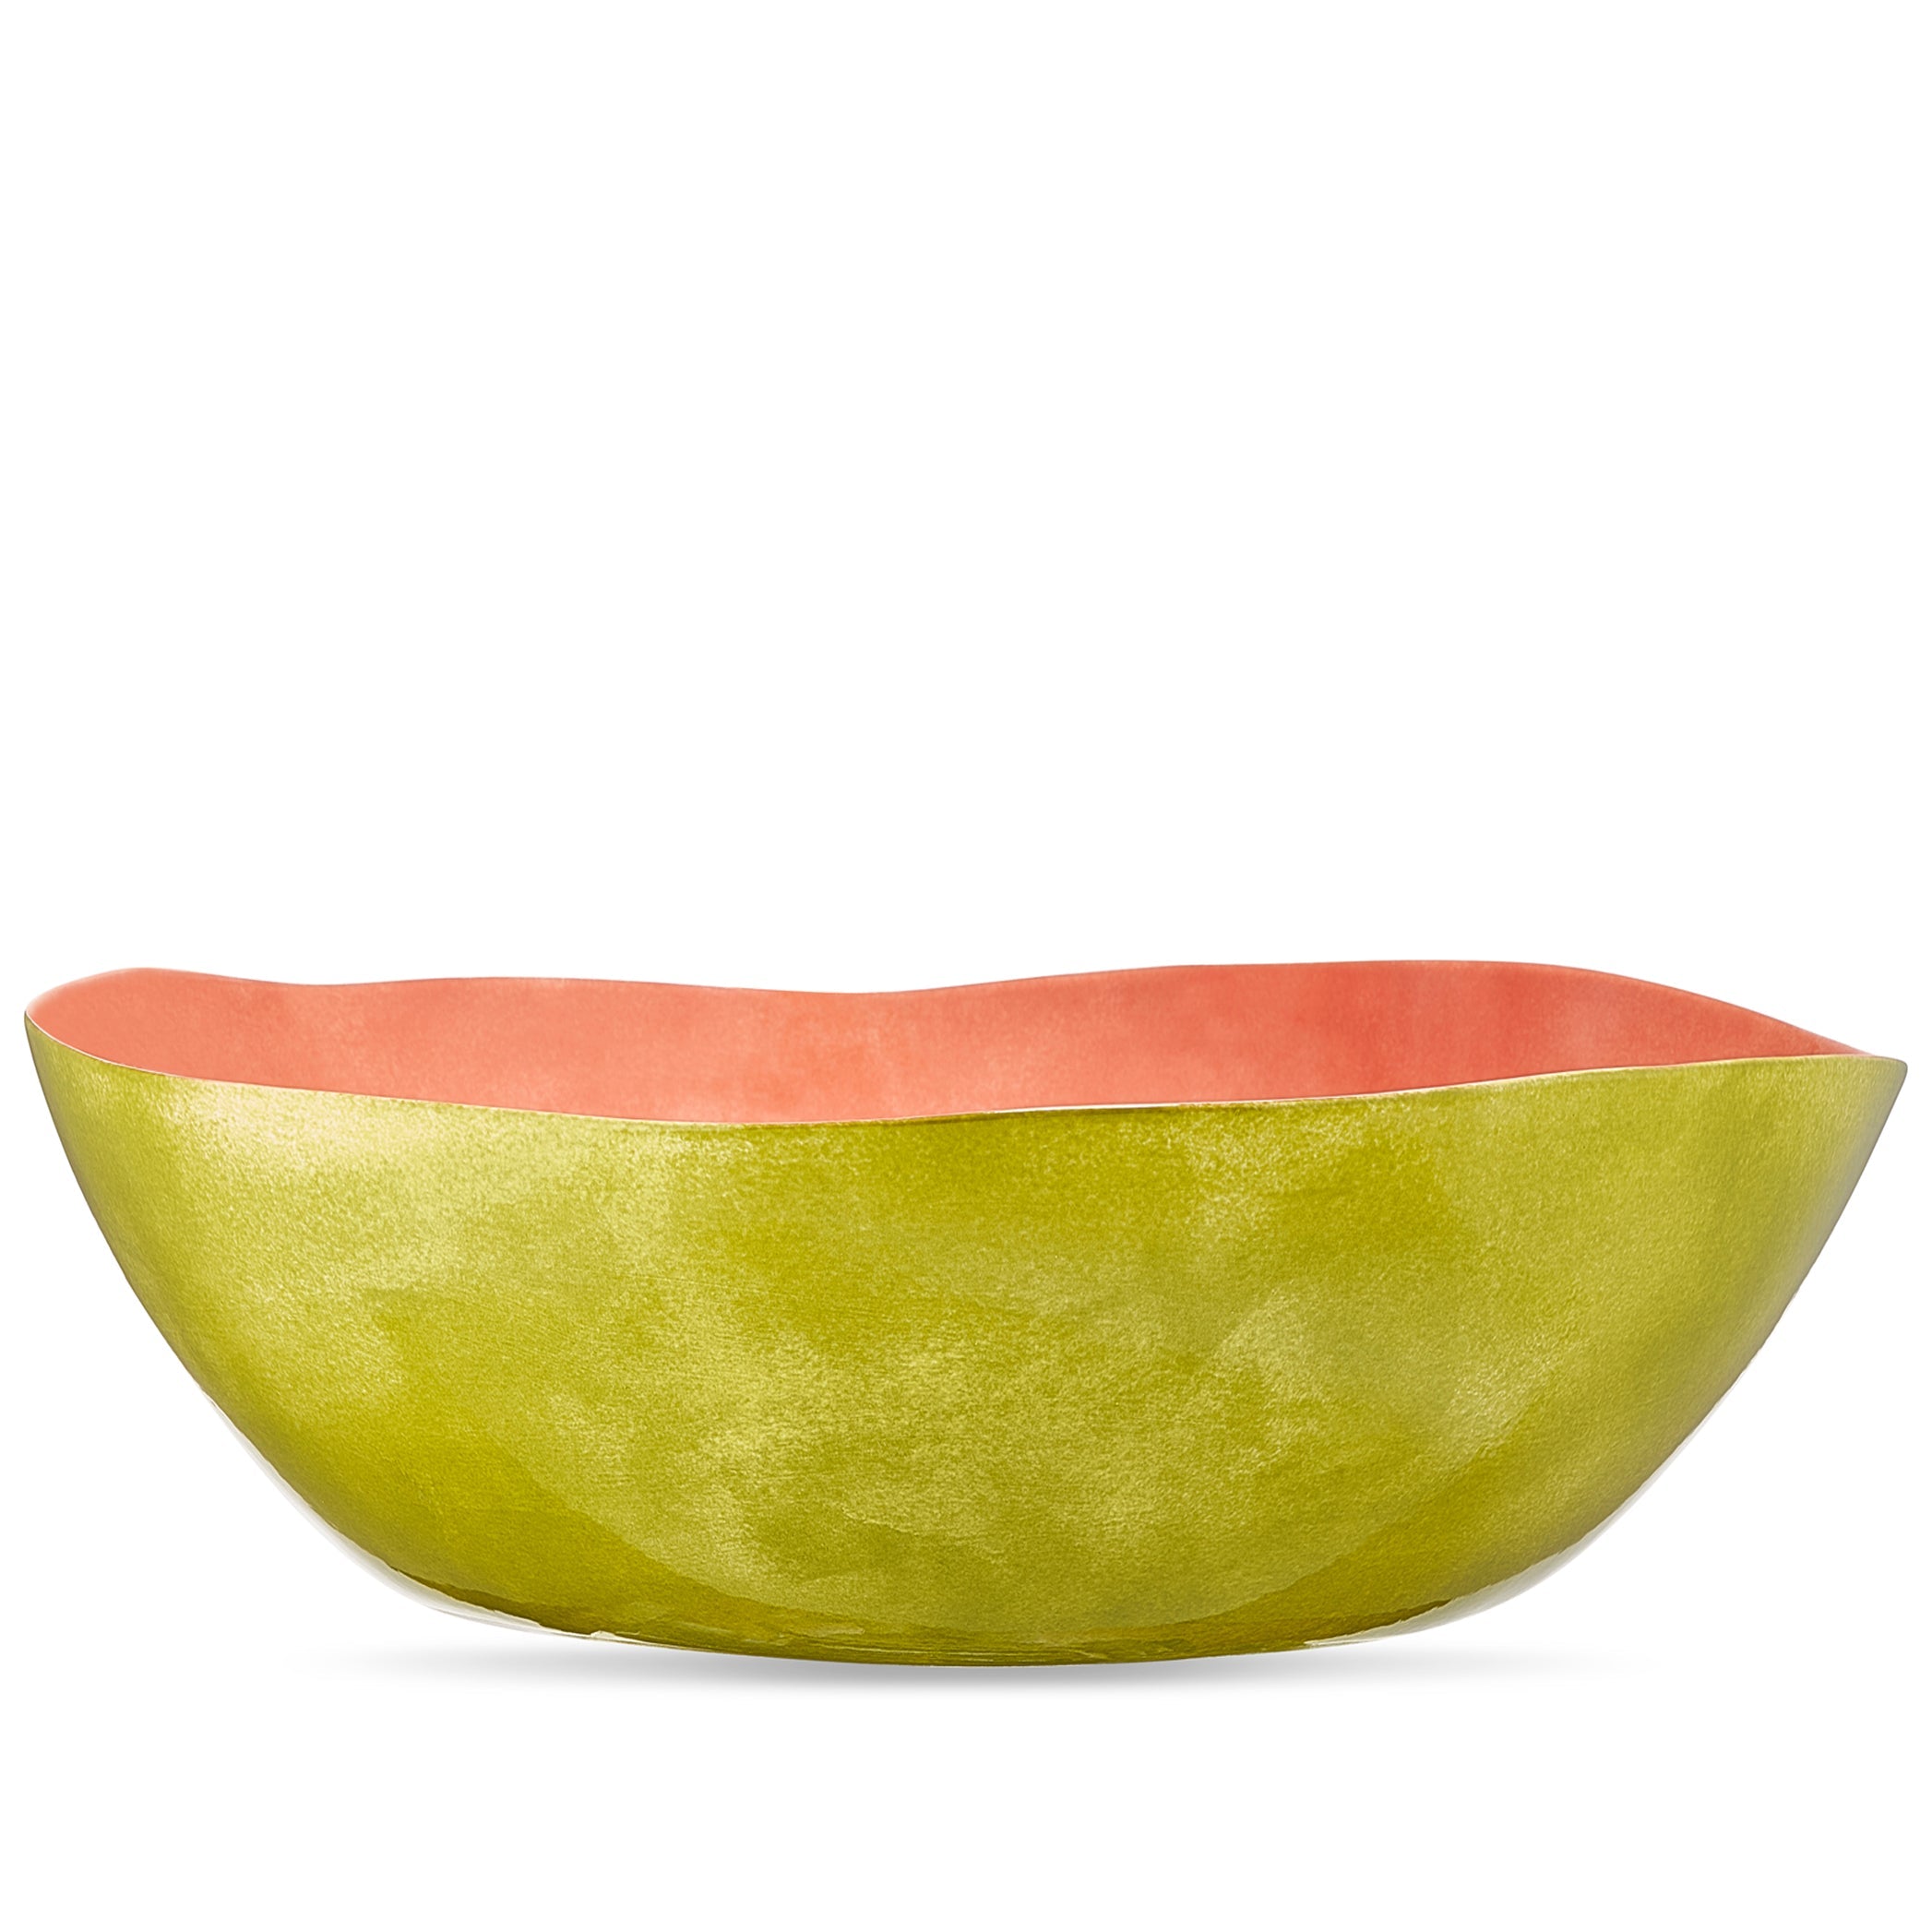 Summerill & Bishop Handmade 43cm Porcelain Extra Large Salad Bowl in Two Tone Pink and Green